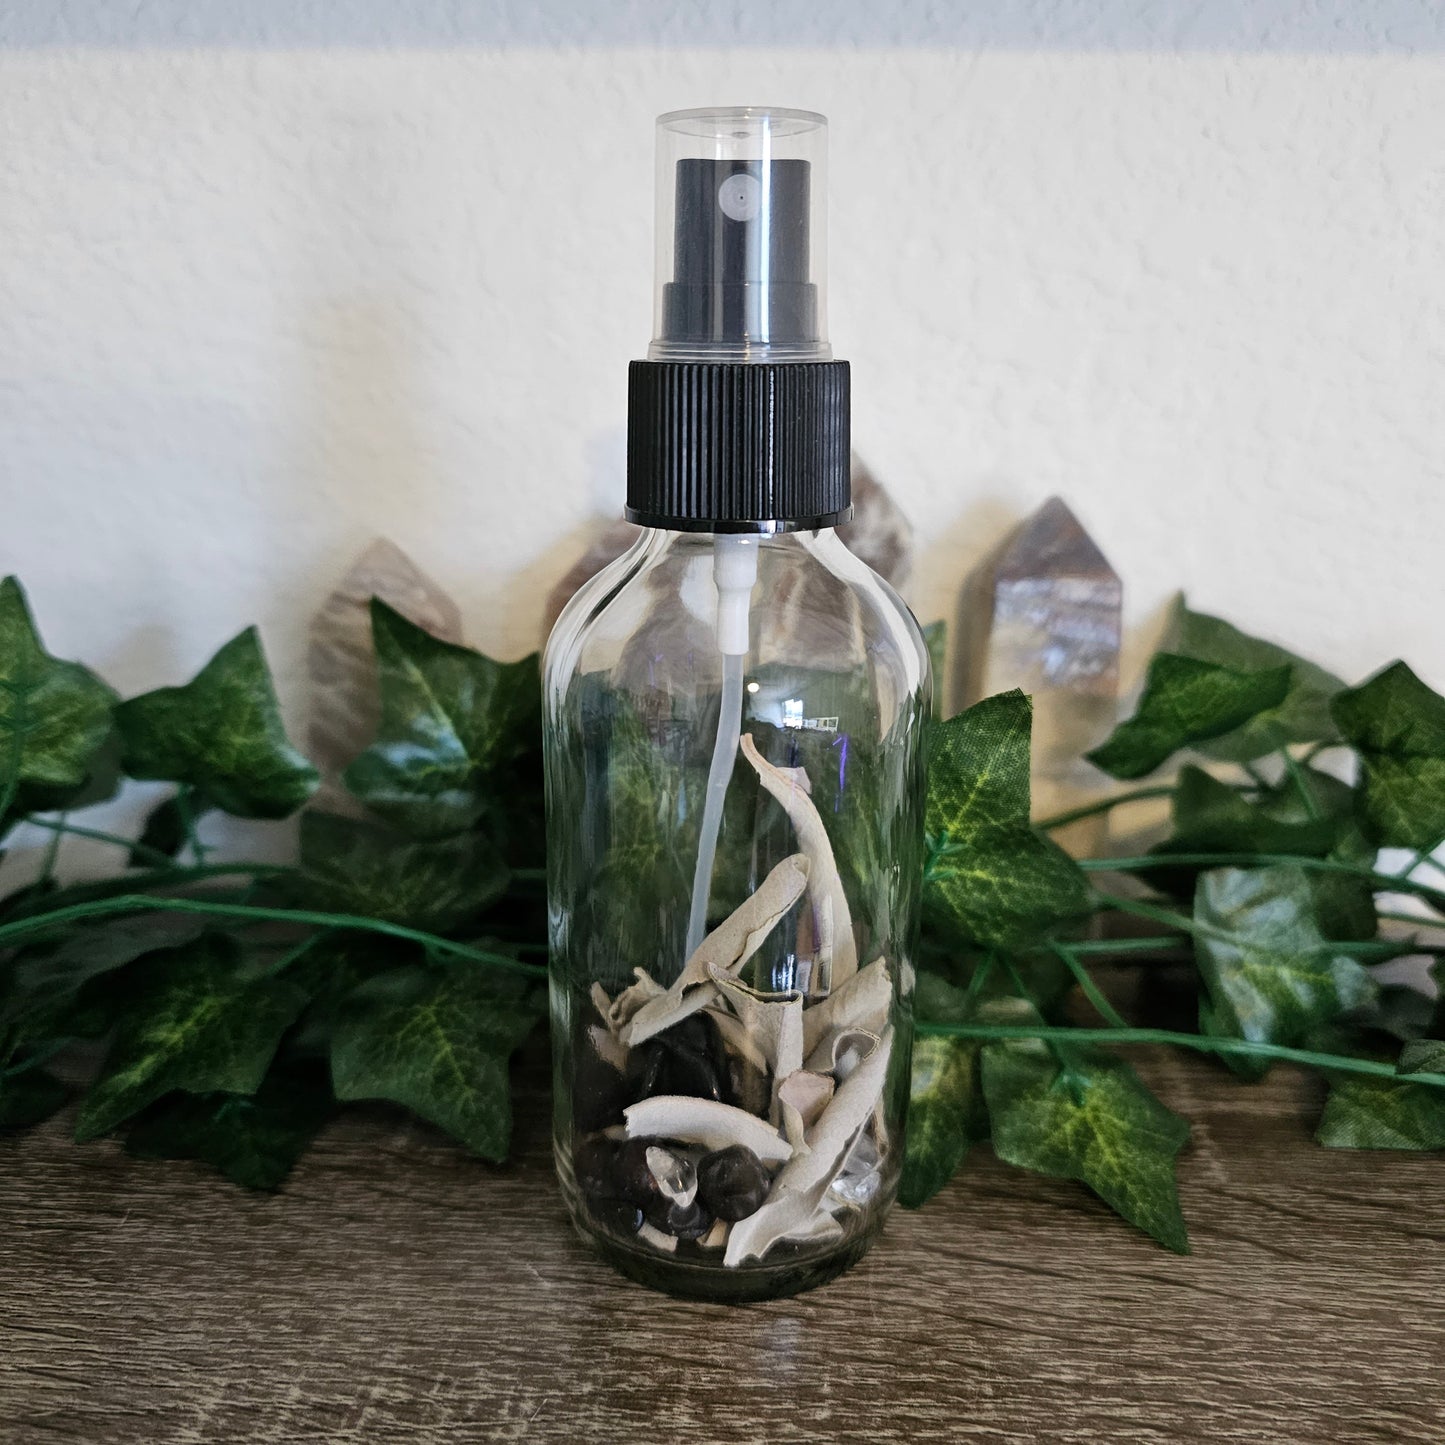 White Sage and Palo Santo Smudge Spray - Clear, Cleanse, Banish, Protect - Smudging Mist - Herb and Crystal Infused - Ritual & Altar Tools